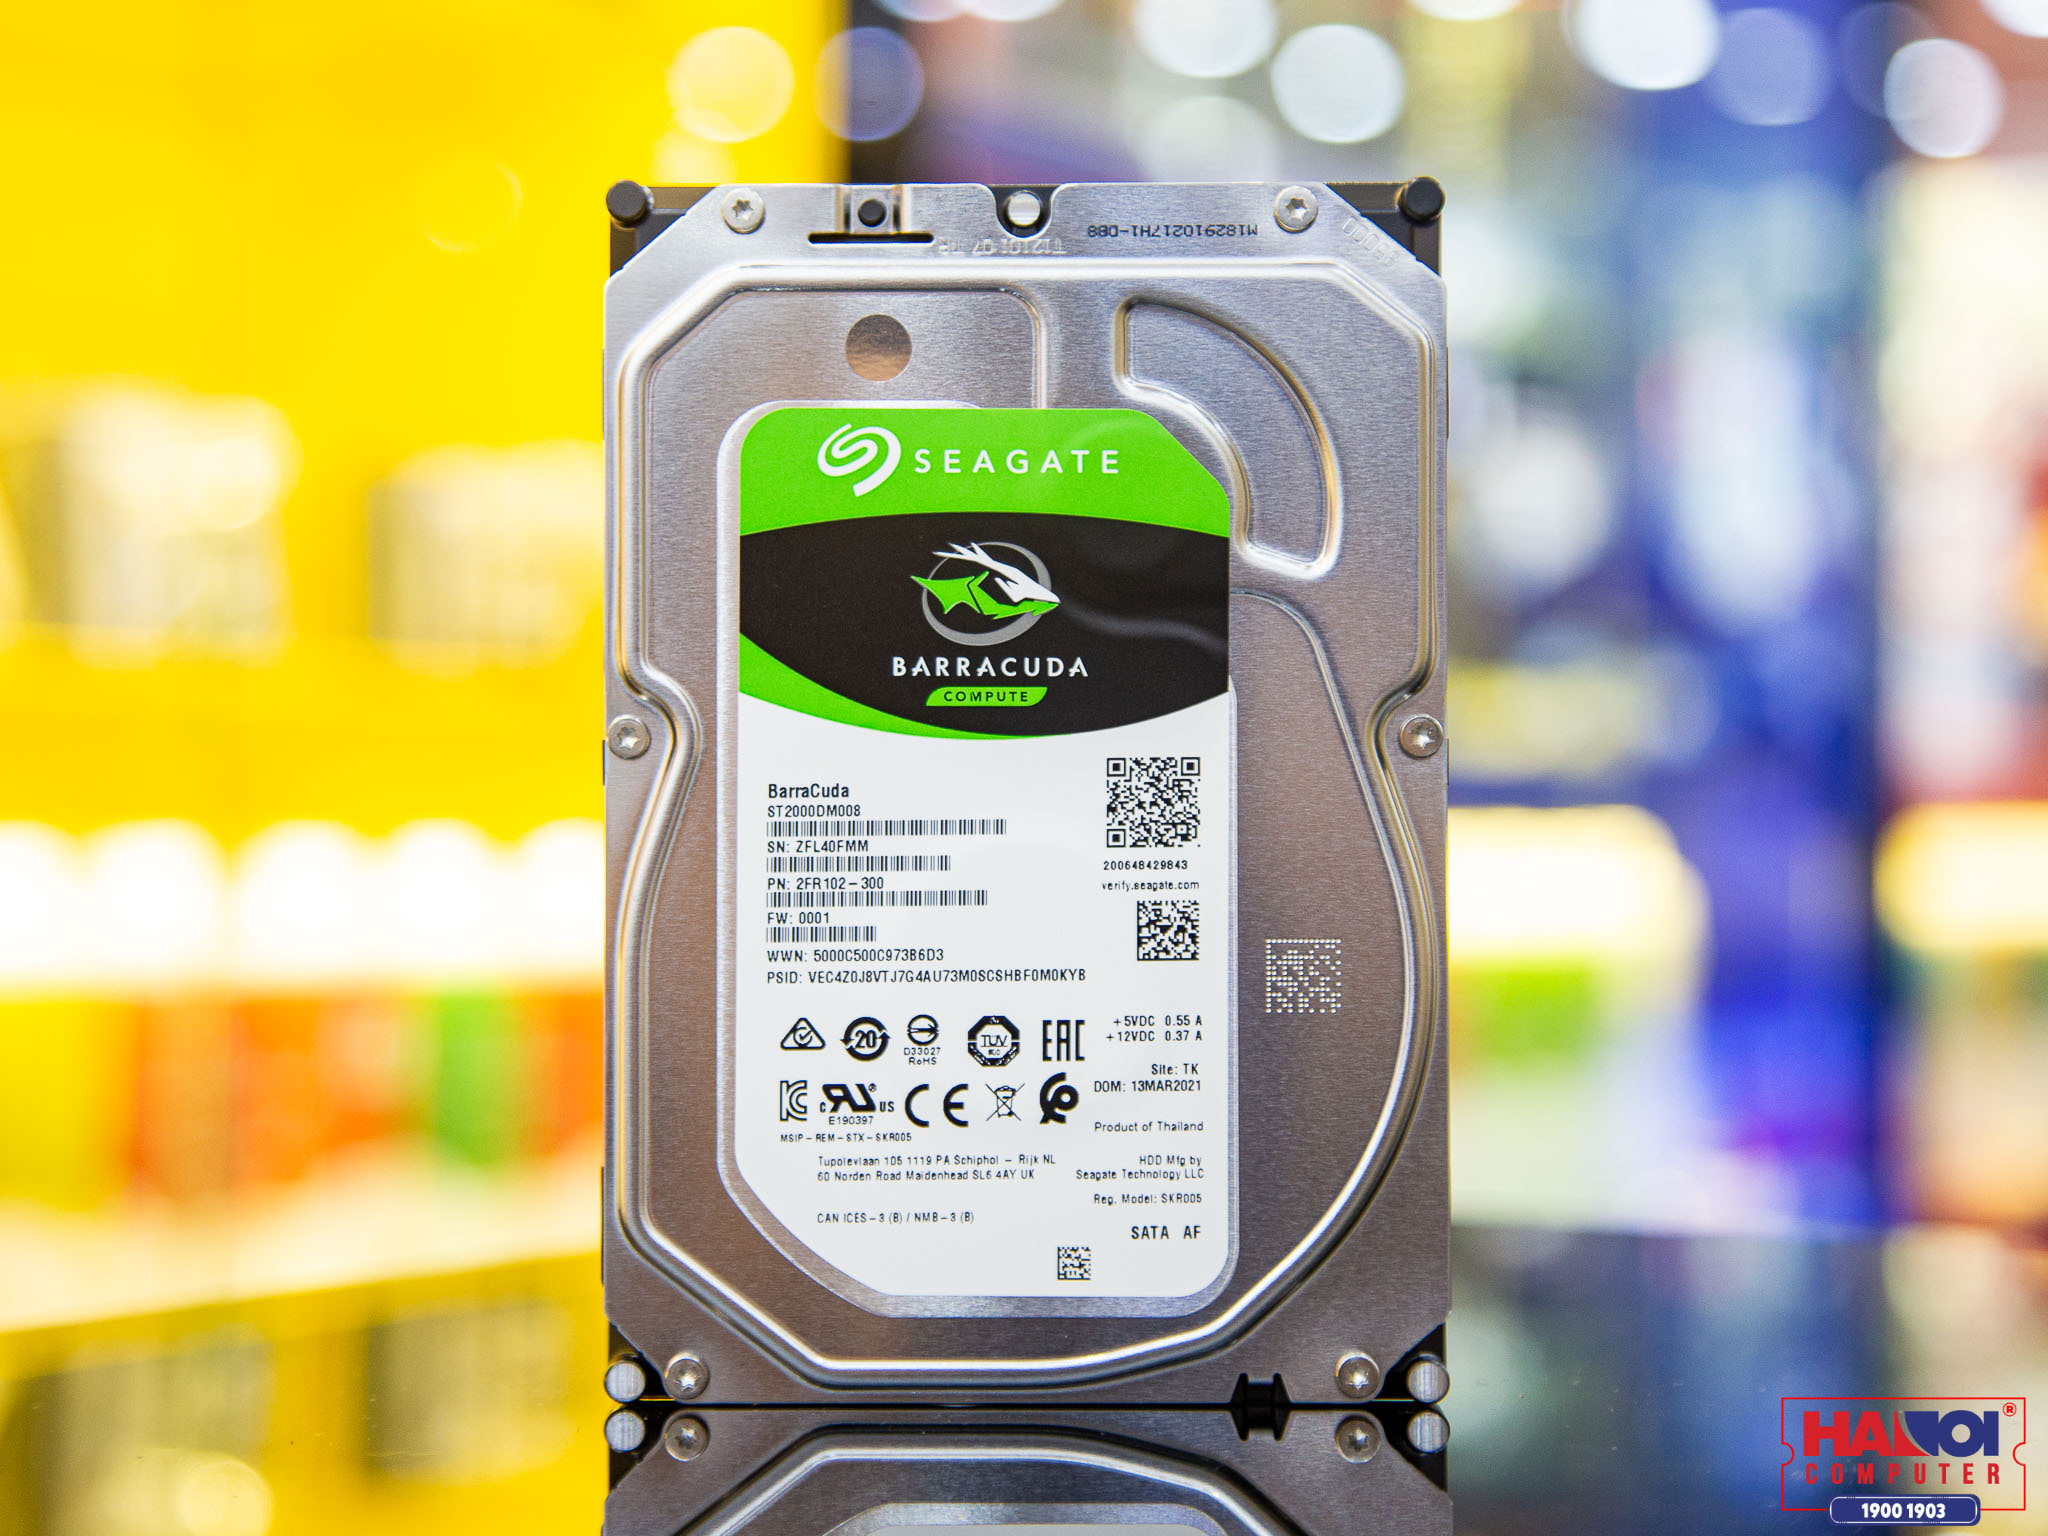 Ổ cứng HDD Seagate 1TB